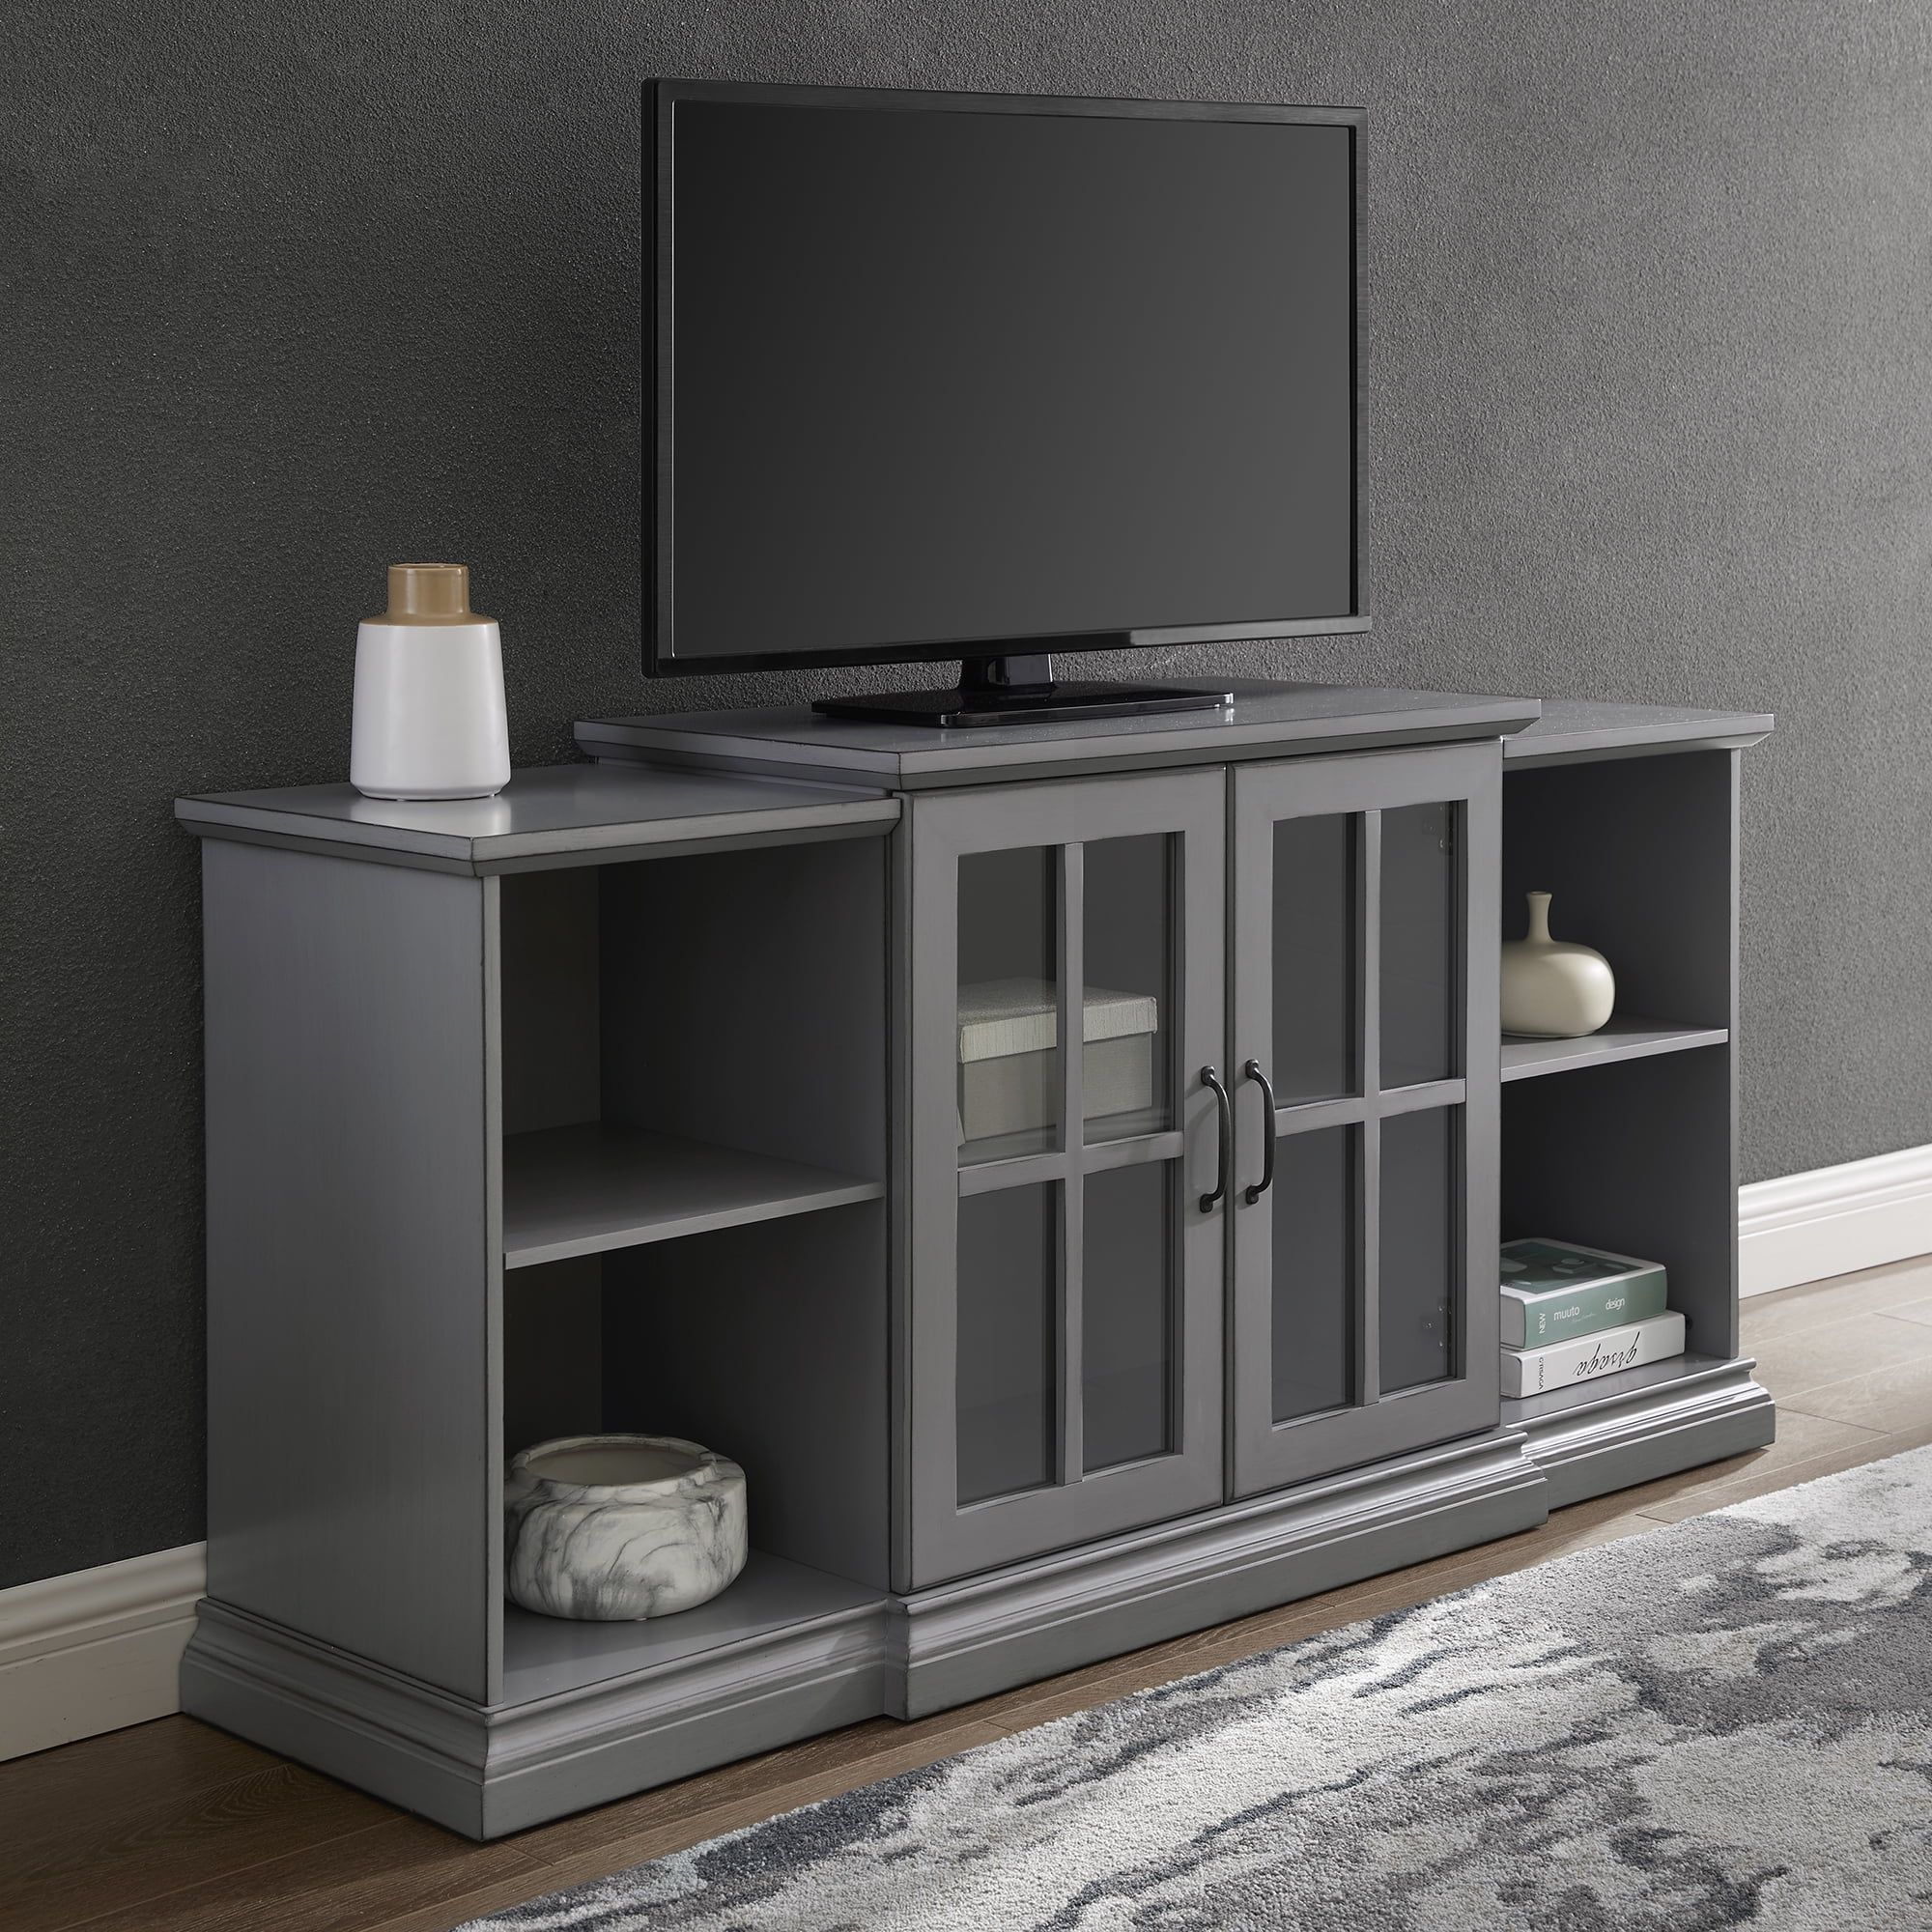 Manor Park Classic Tiered Tv Stand For Tvs Up To 65", Antique Grey Pertaining To Tier Stands For Tvs (View 5 of 20)